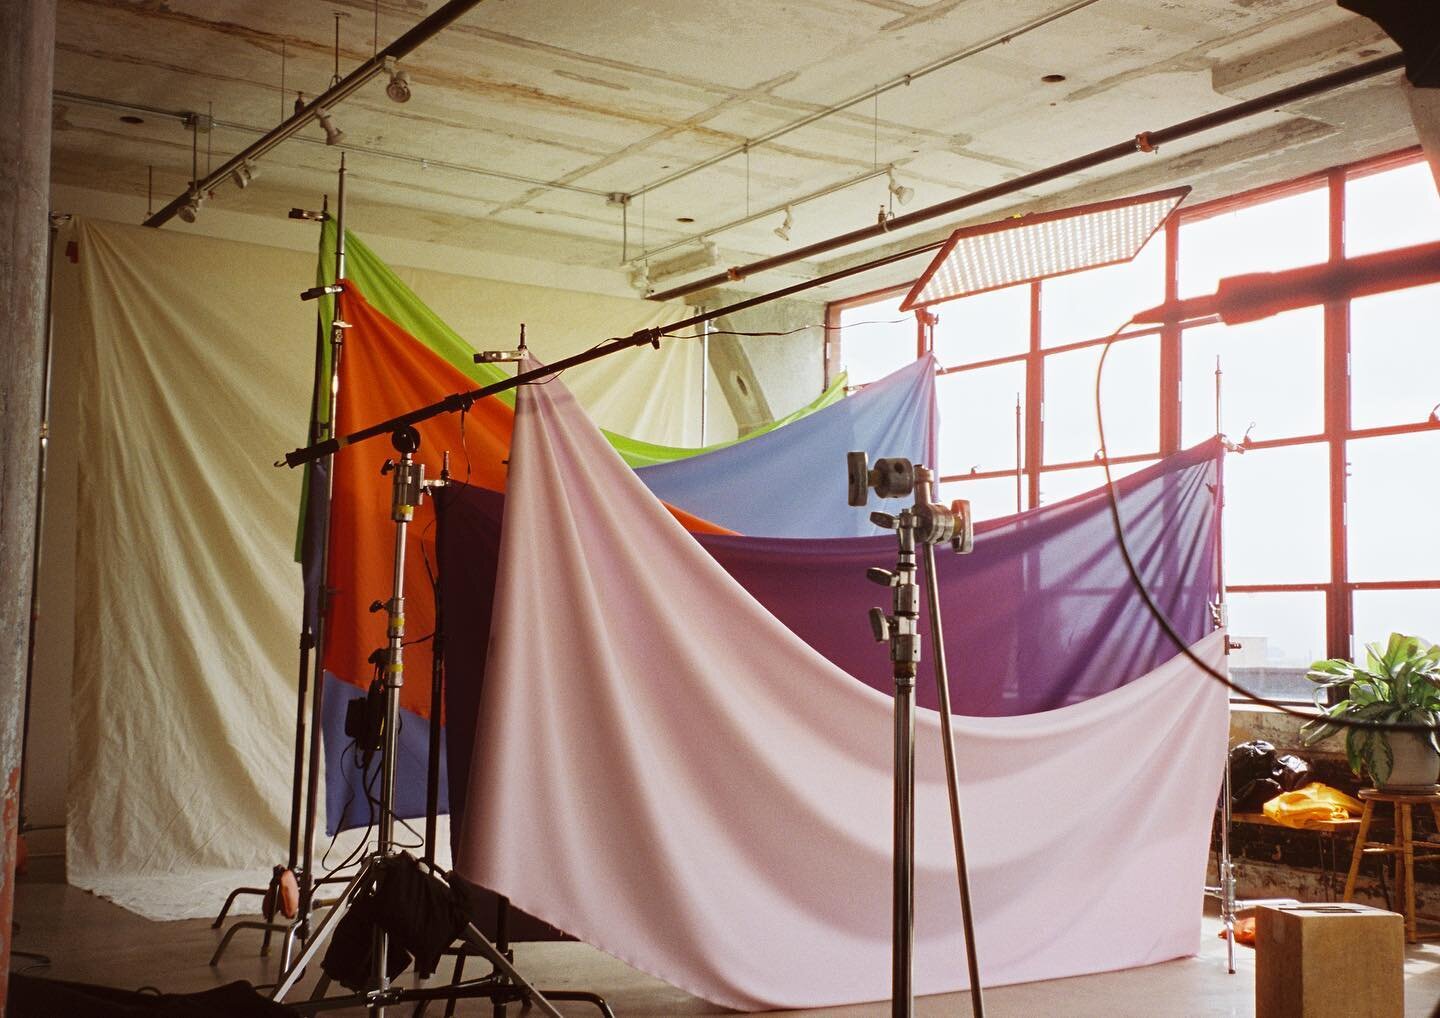 Some BTS and images from the S/S @thesedaysmag Artists to Watch photoshoot at the studio